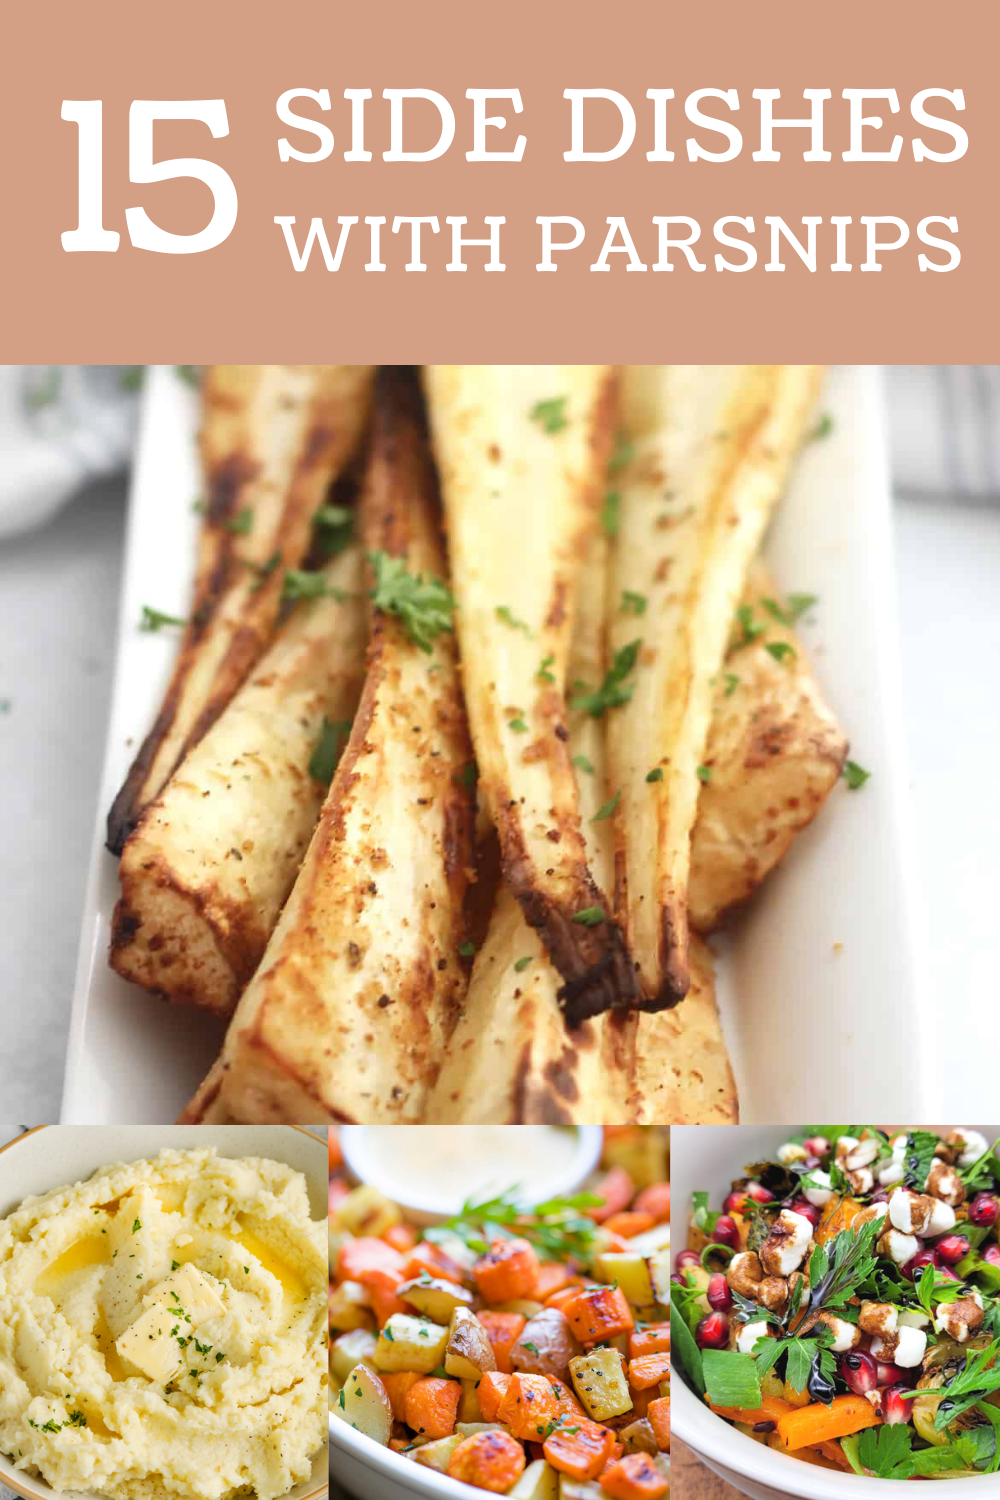 Side Dishes that Use Parsnips